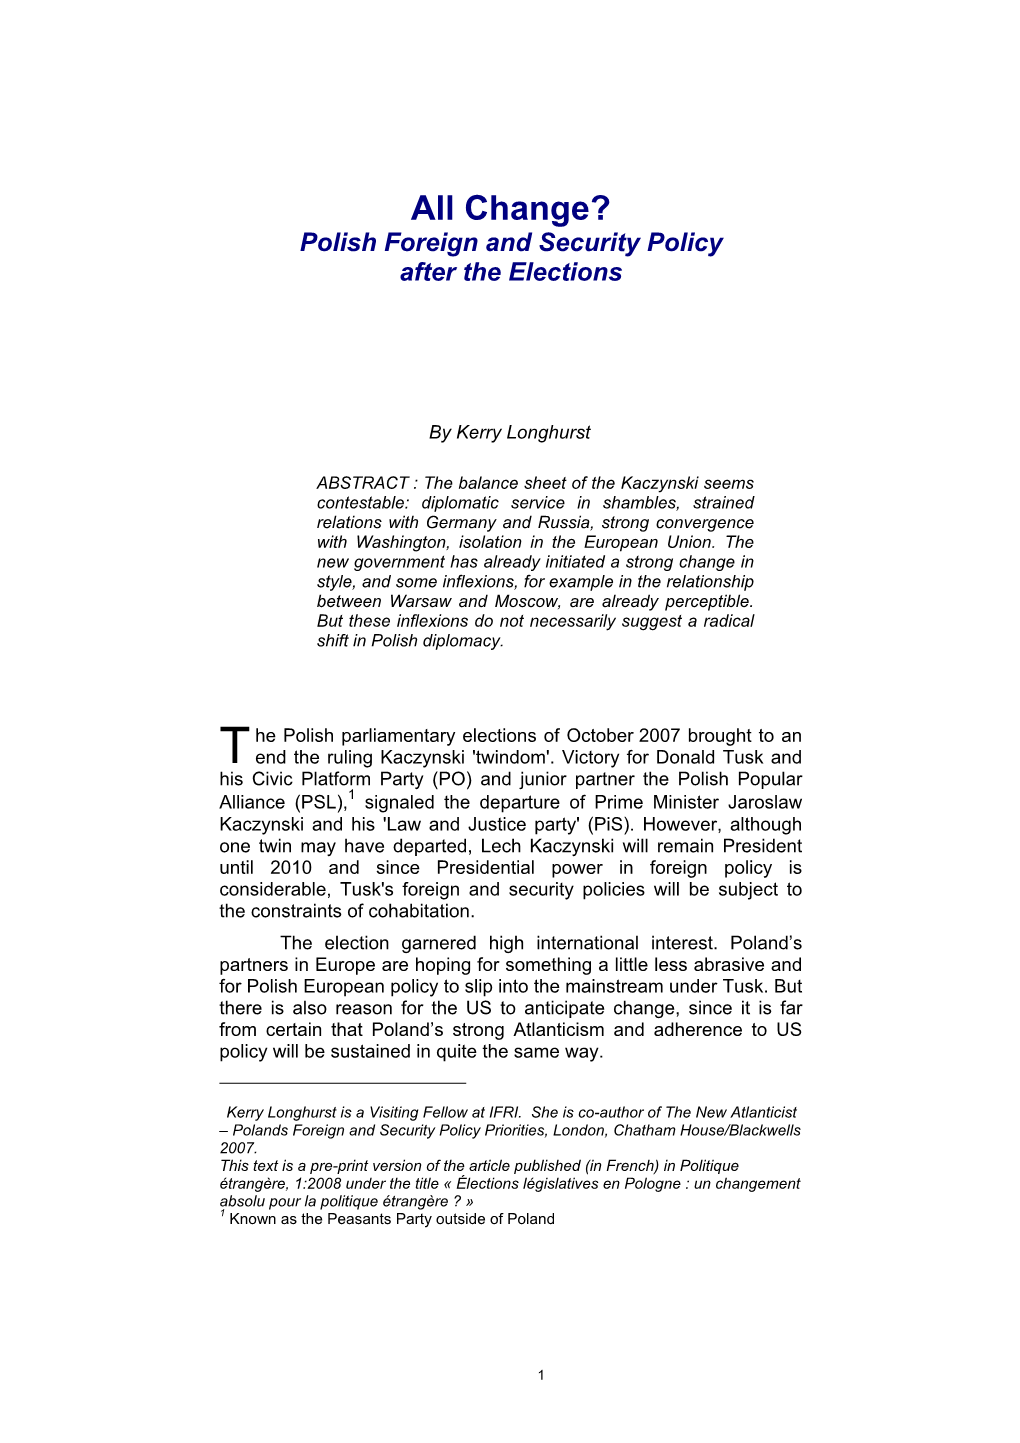 All Change? Polish Foreign and Security Policy After the Elections